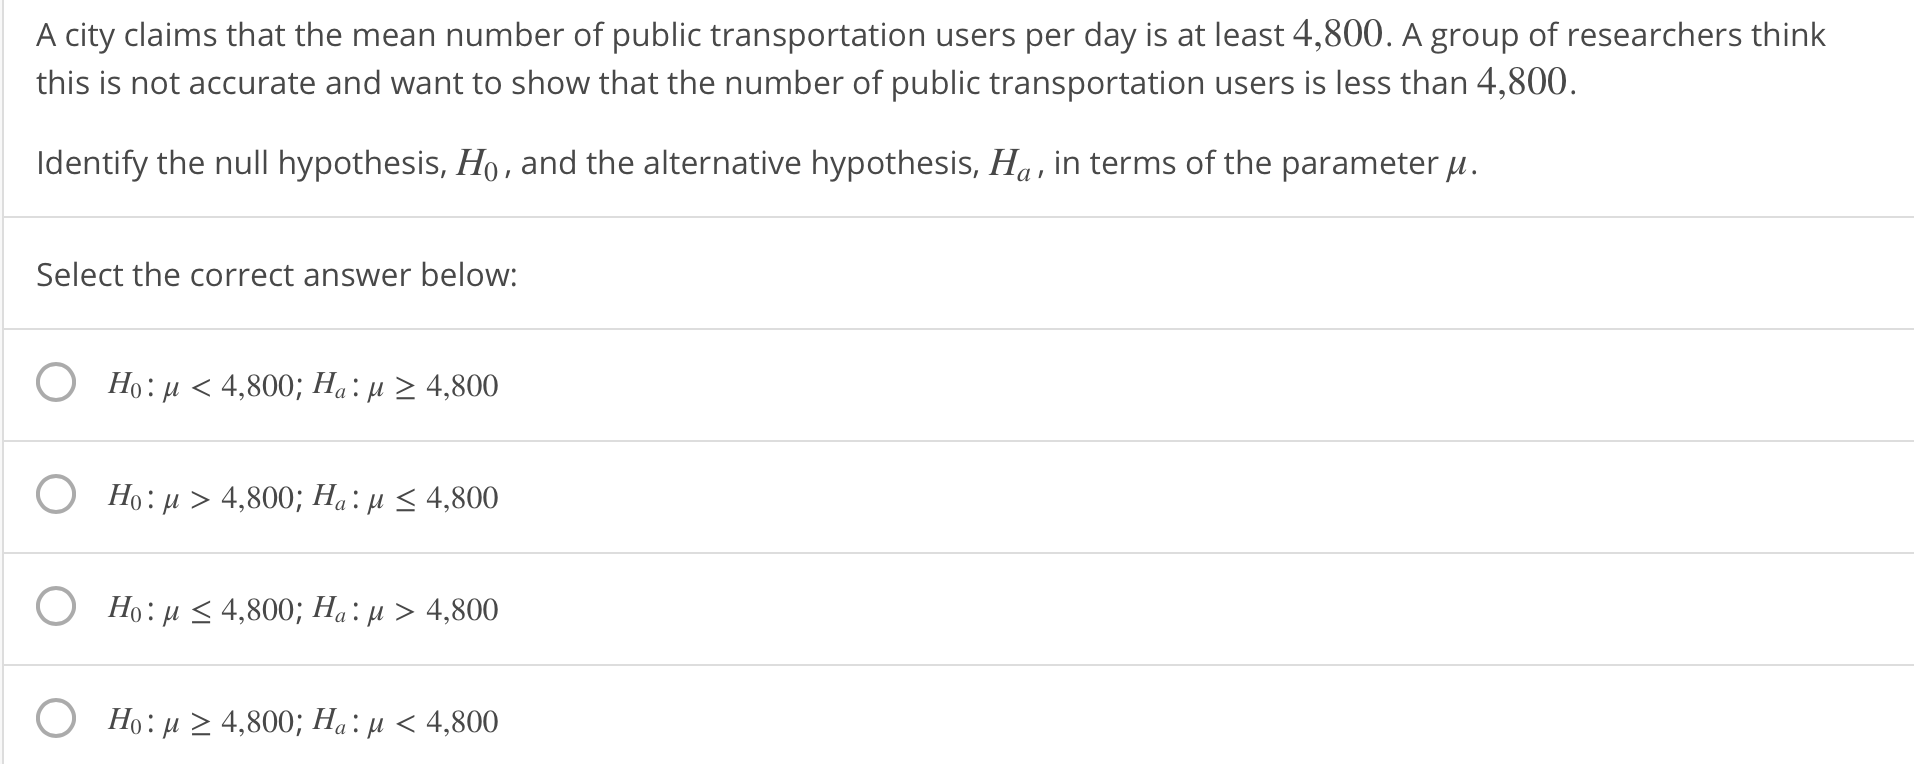 A city claims that the mean number of public transportation users per day is at least 4,800. A group of researchers think
this is not accurate and want to show that the number of public transportation users is less than 4,800
Identify the null hypothesis, Ho, and the alternative hypothesis, Ha , in terms of the parameter μ.
Select the correct answer below:
O
Ho: μ < 4,800; Ha: μ 24,800
Ho: u > 4,800; Ha: u K 4,800
Ho: μ 4,800; Ha: μ > 4,800
Ho: μ 24,800; Ha : μ < 4,800
O
O
